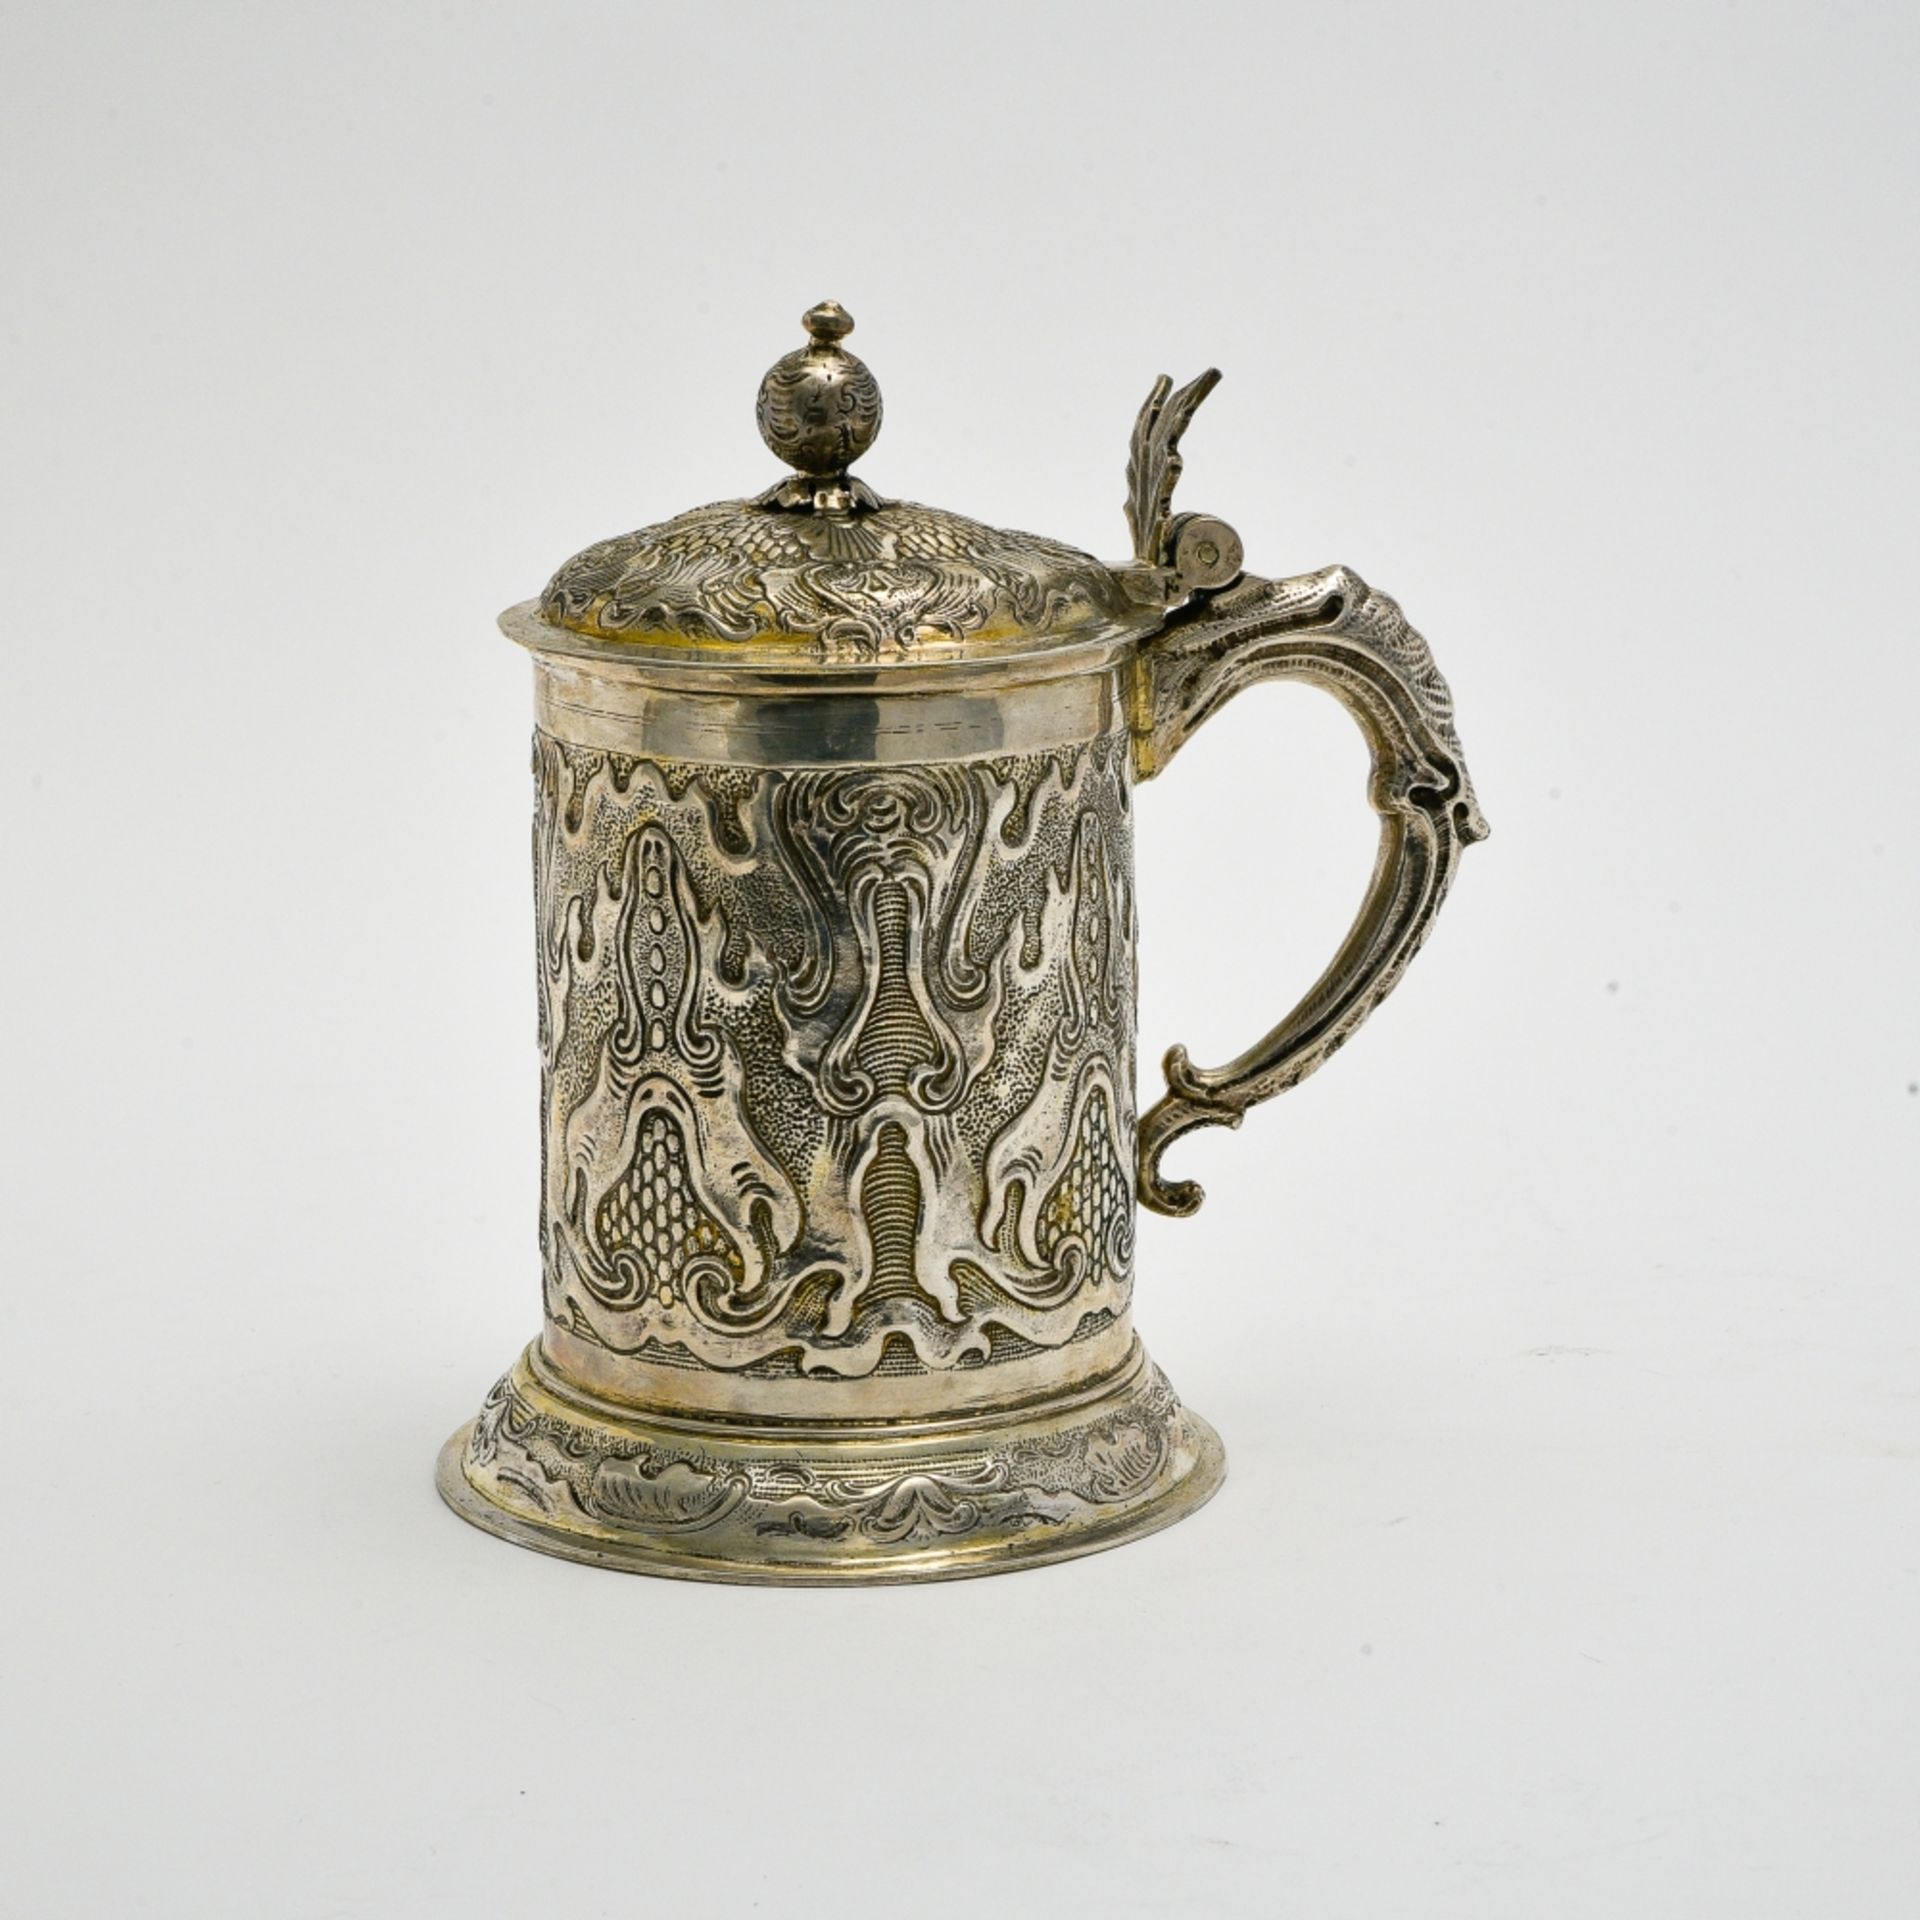 Covered mug or tankard GERMANY, LATE 19TH-EARLY 20TH CENTURY 800 silver, vermeil interior. - Image 2 of 4